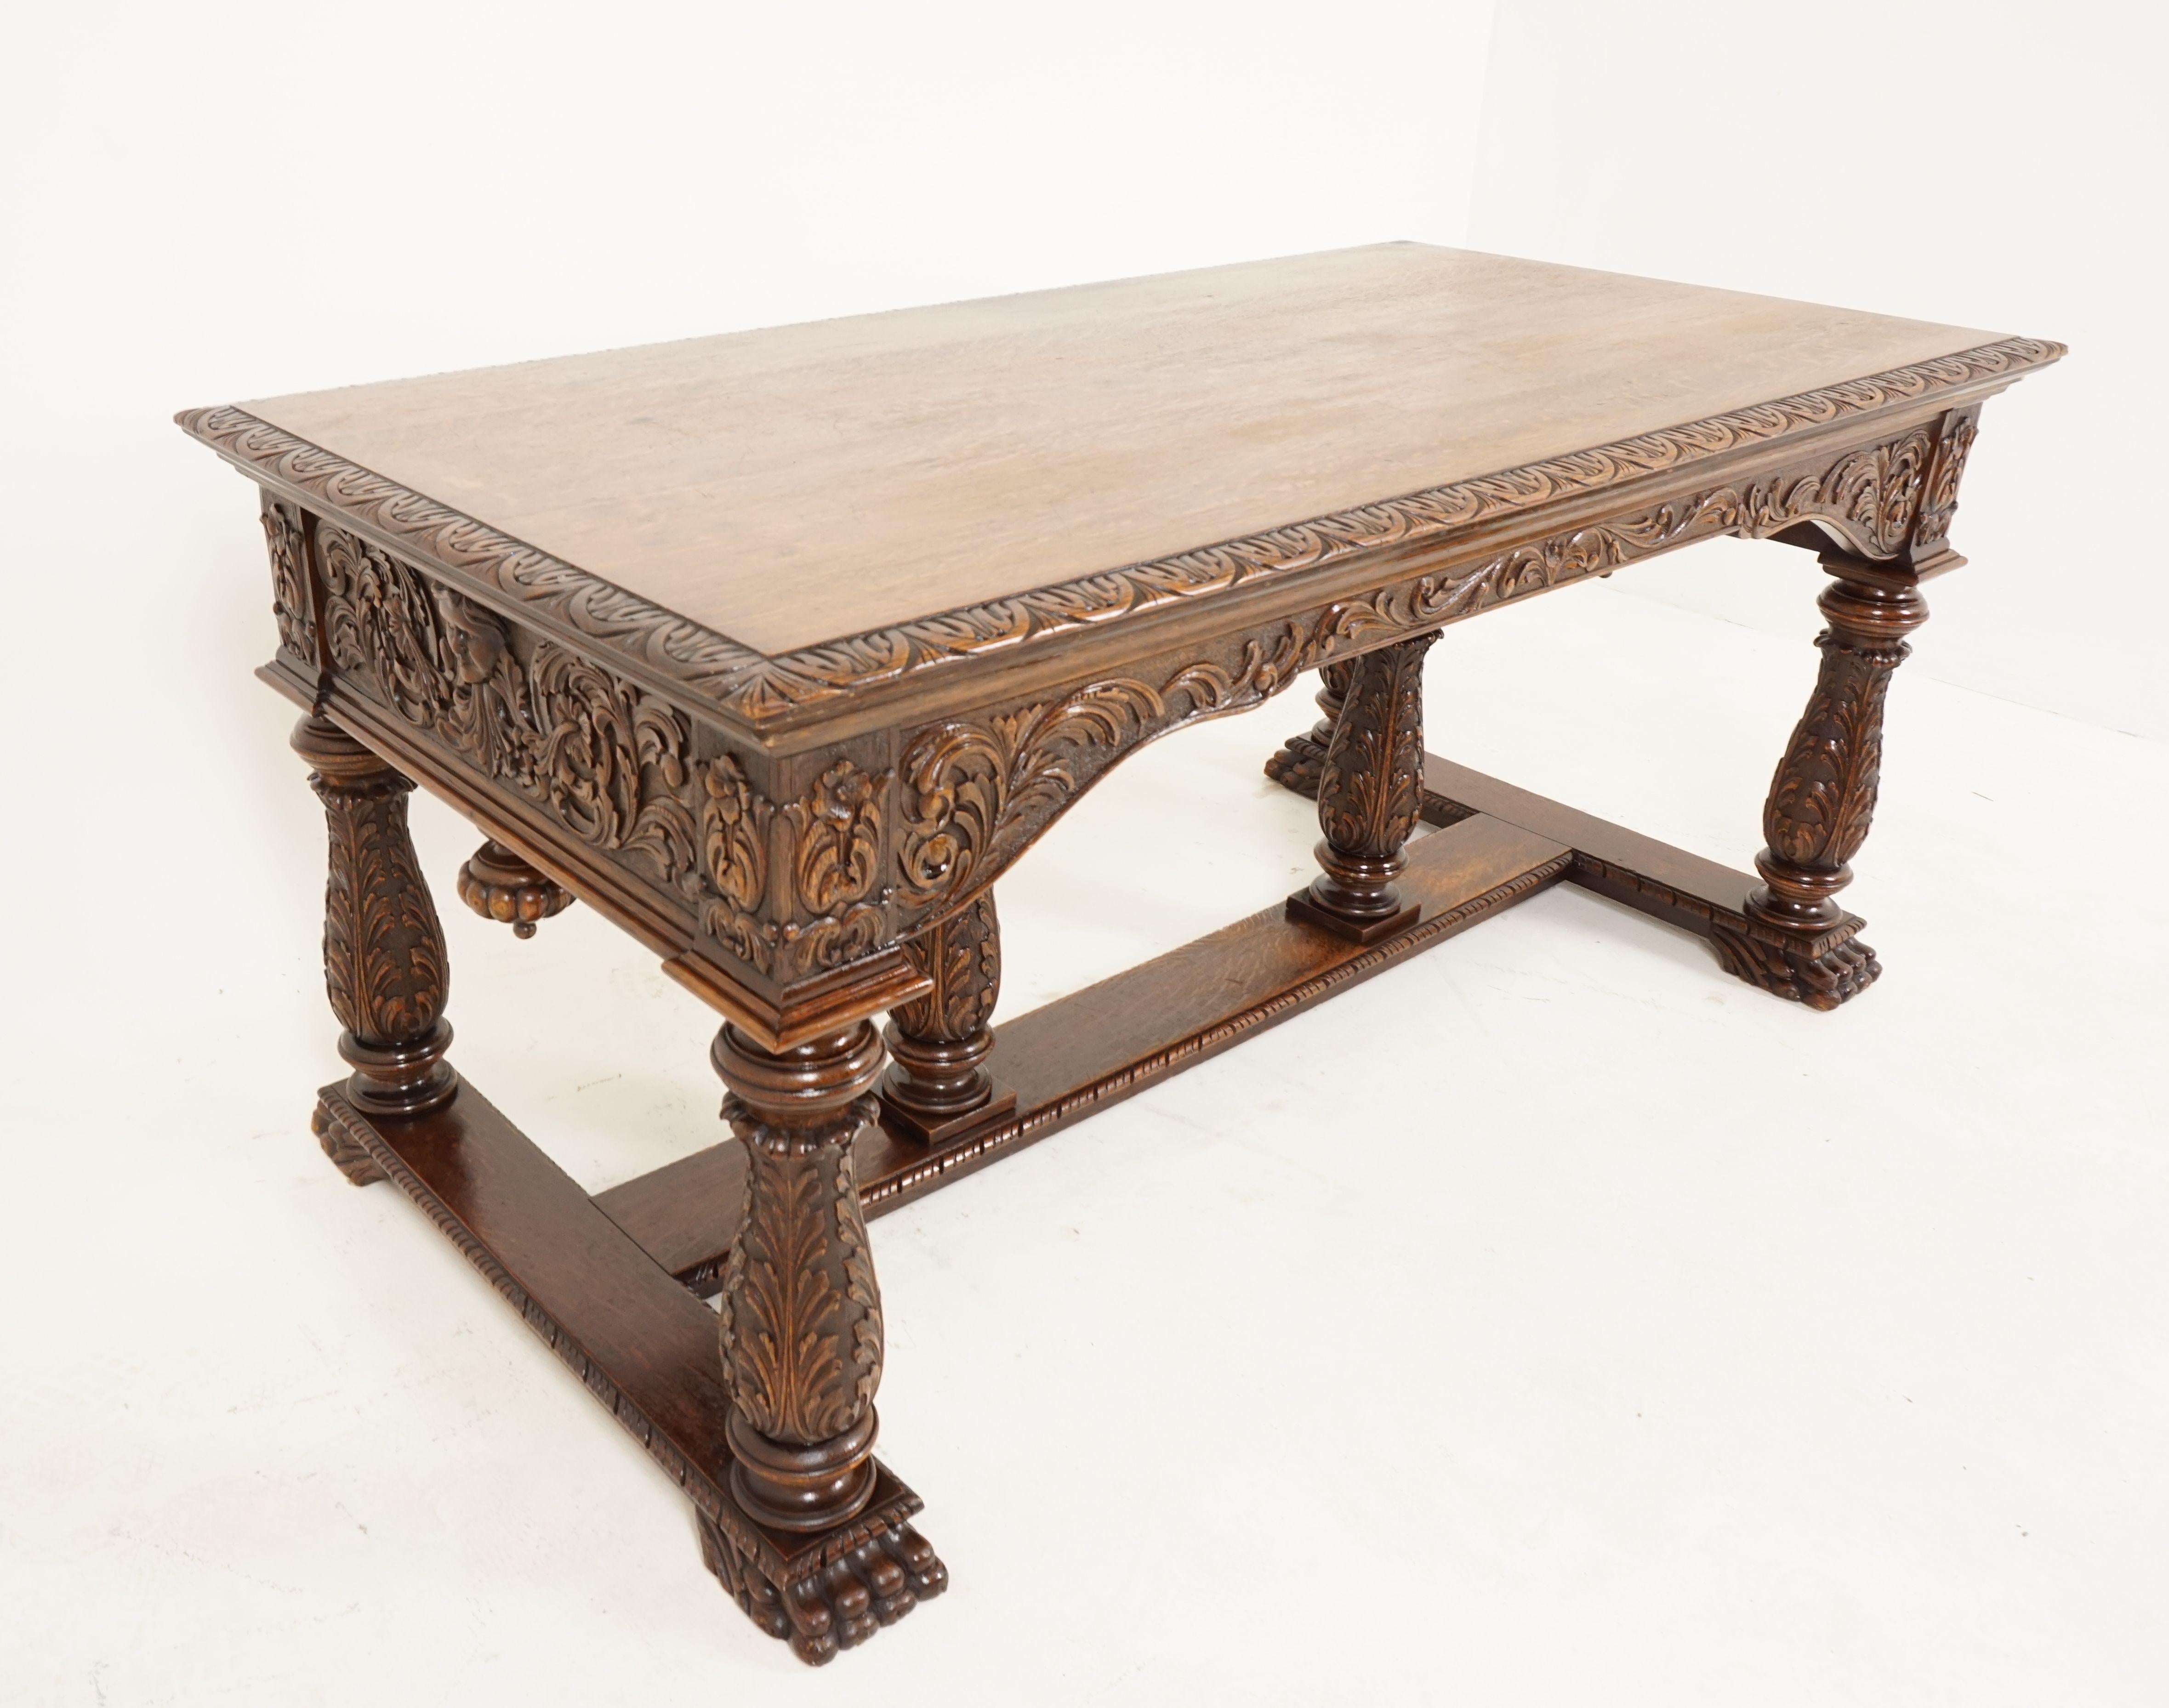 Victorian hand carved tiger oak library table, hall table, desk, Scotland 1880, H207

Scotland 1880
Solid oak
Original finish
Rectangular tiger oak top with carved edge
Heavily carved apron underneath
Carved faces on each end
All standing on four